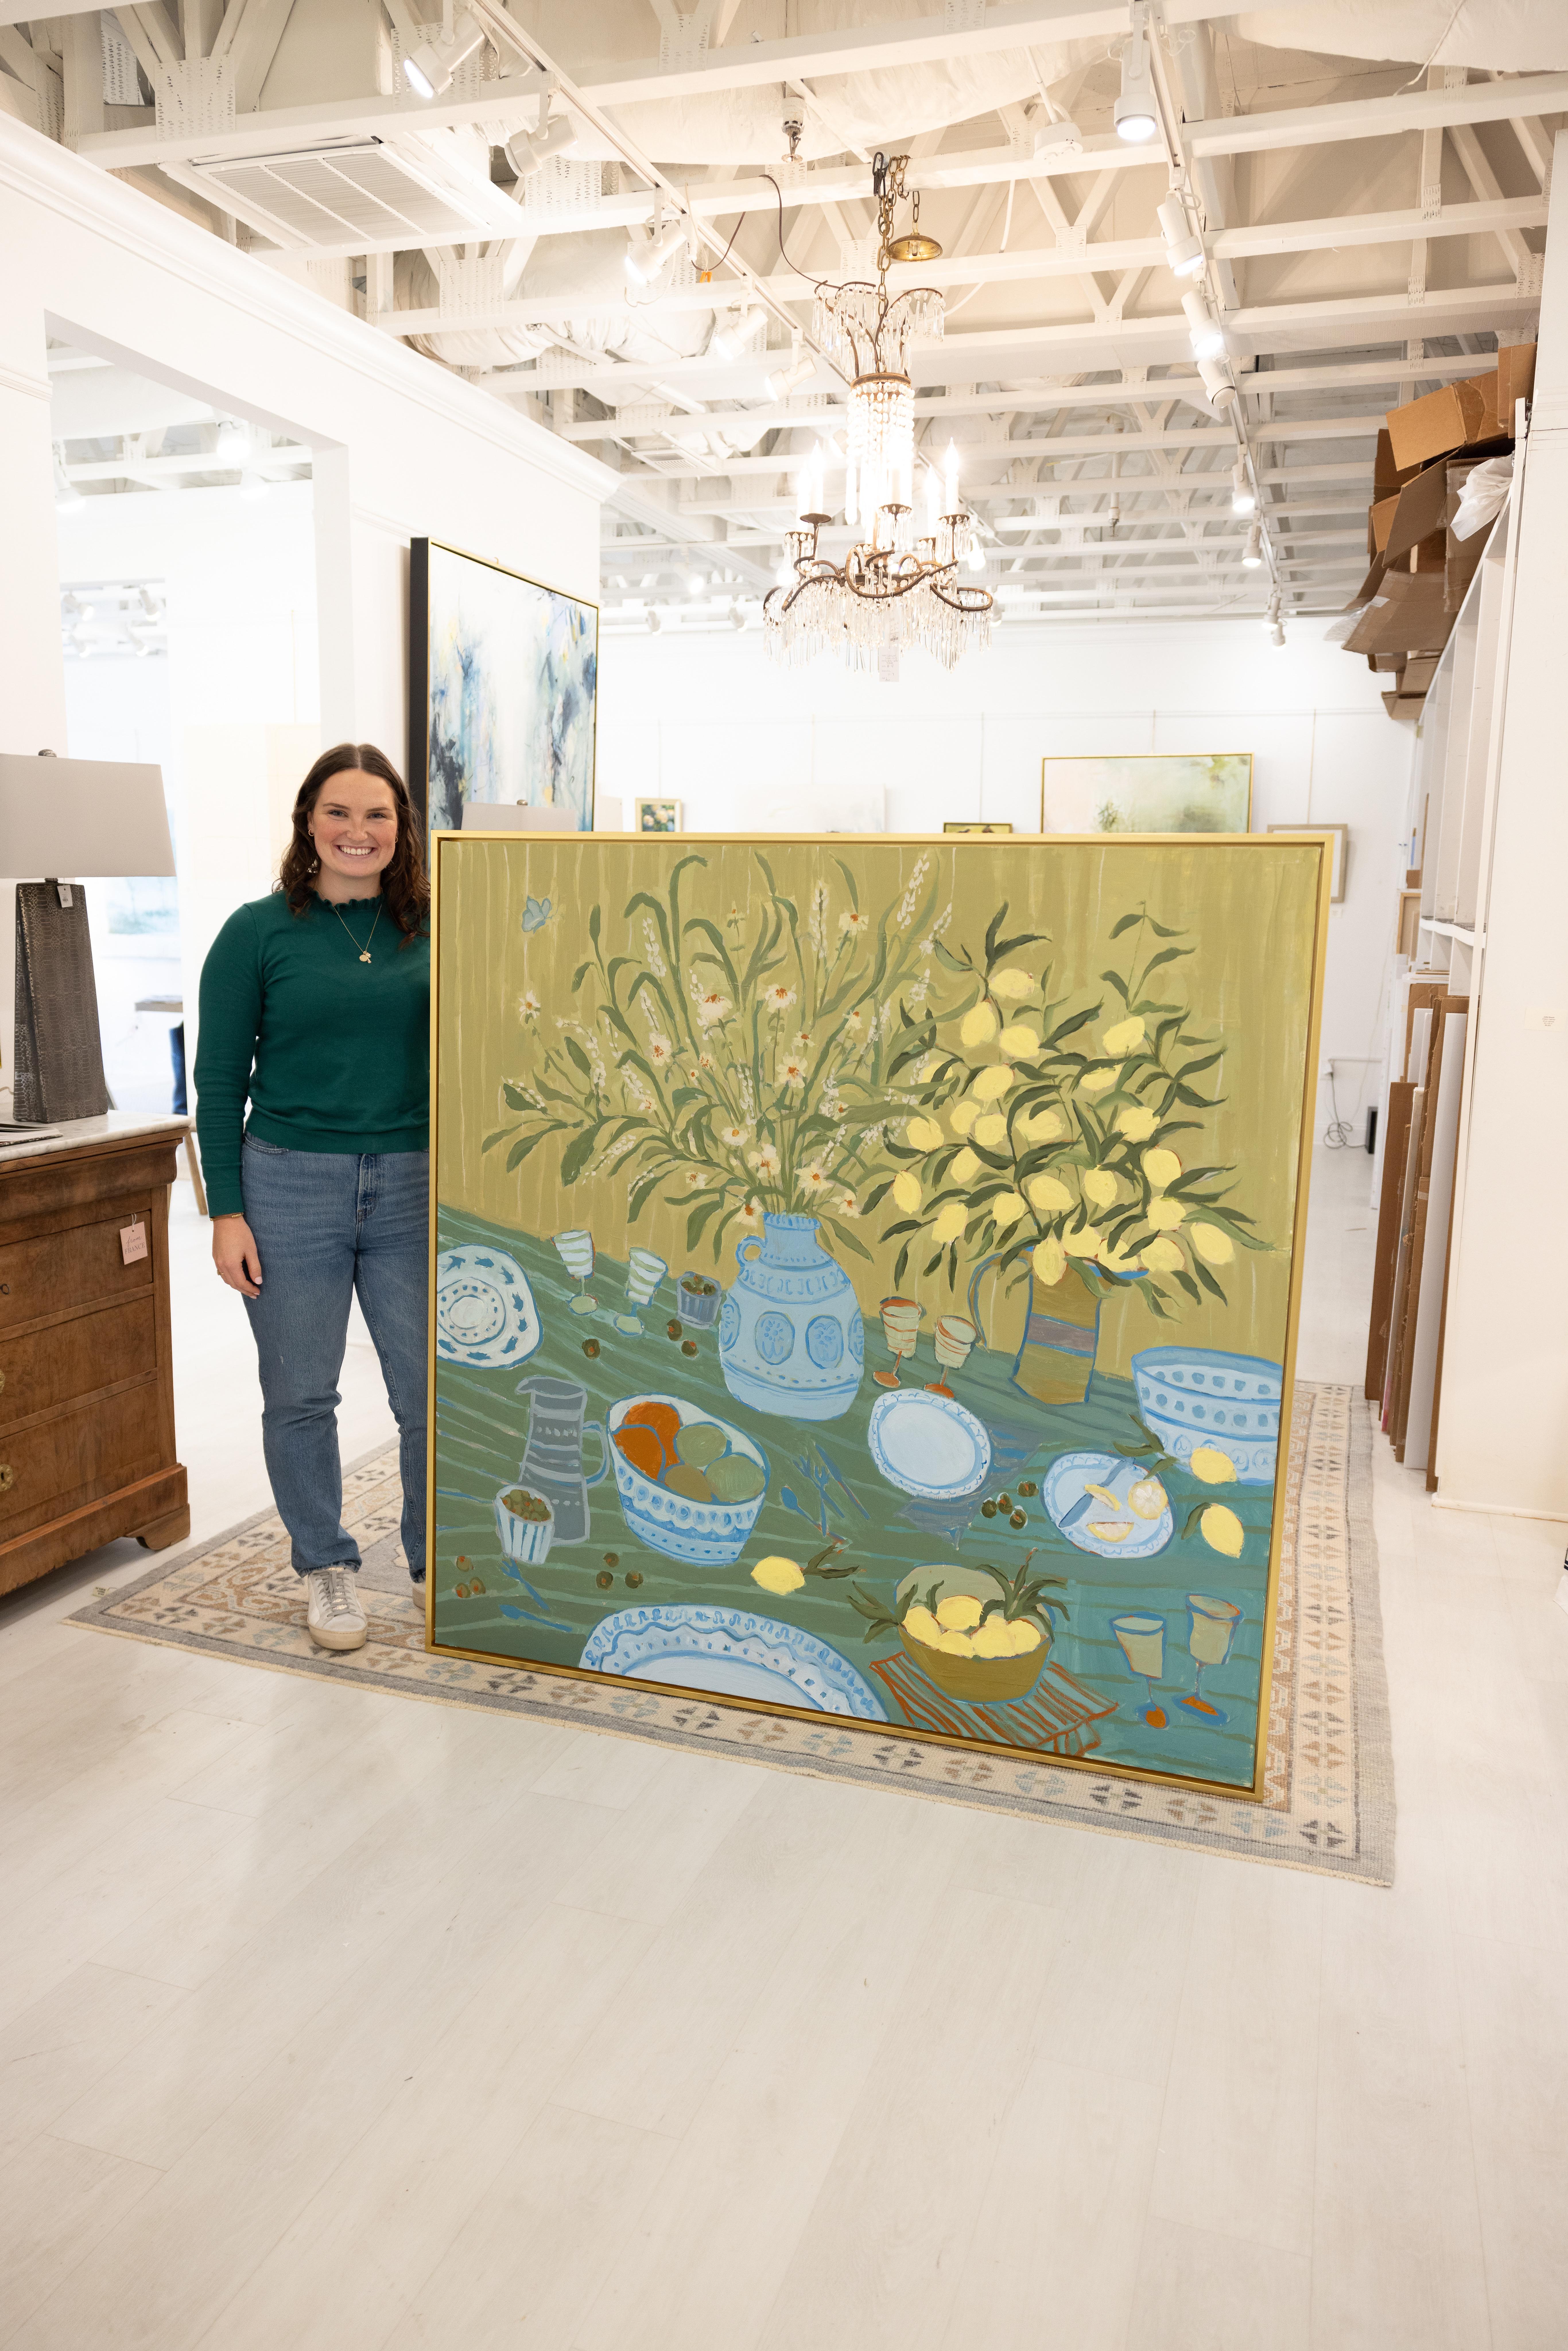 Born and raised in Georgia, from a young age, Laura developed a deep love for an array of creative outlets. Design, painting and florals have played a huge part in her life. Laura attended Auburn University and earned a Bachelor’s degree in Graphic